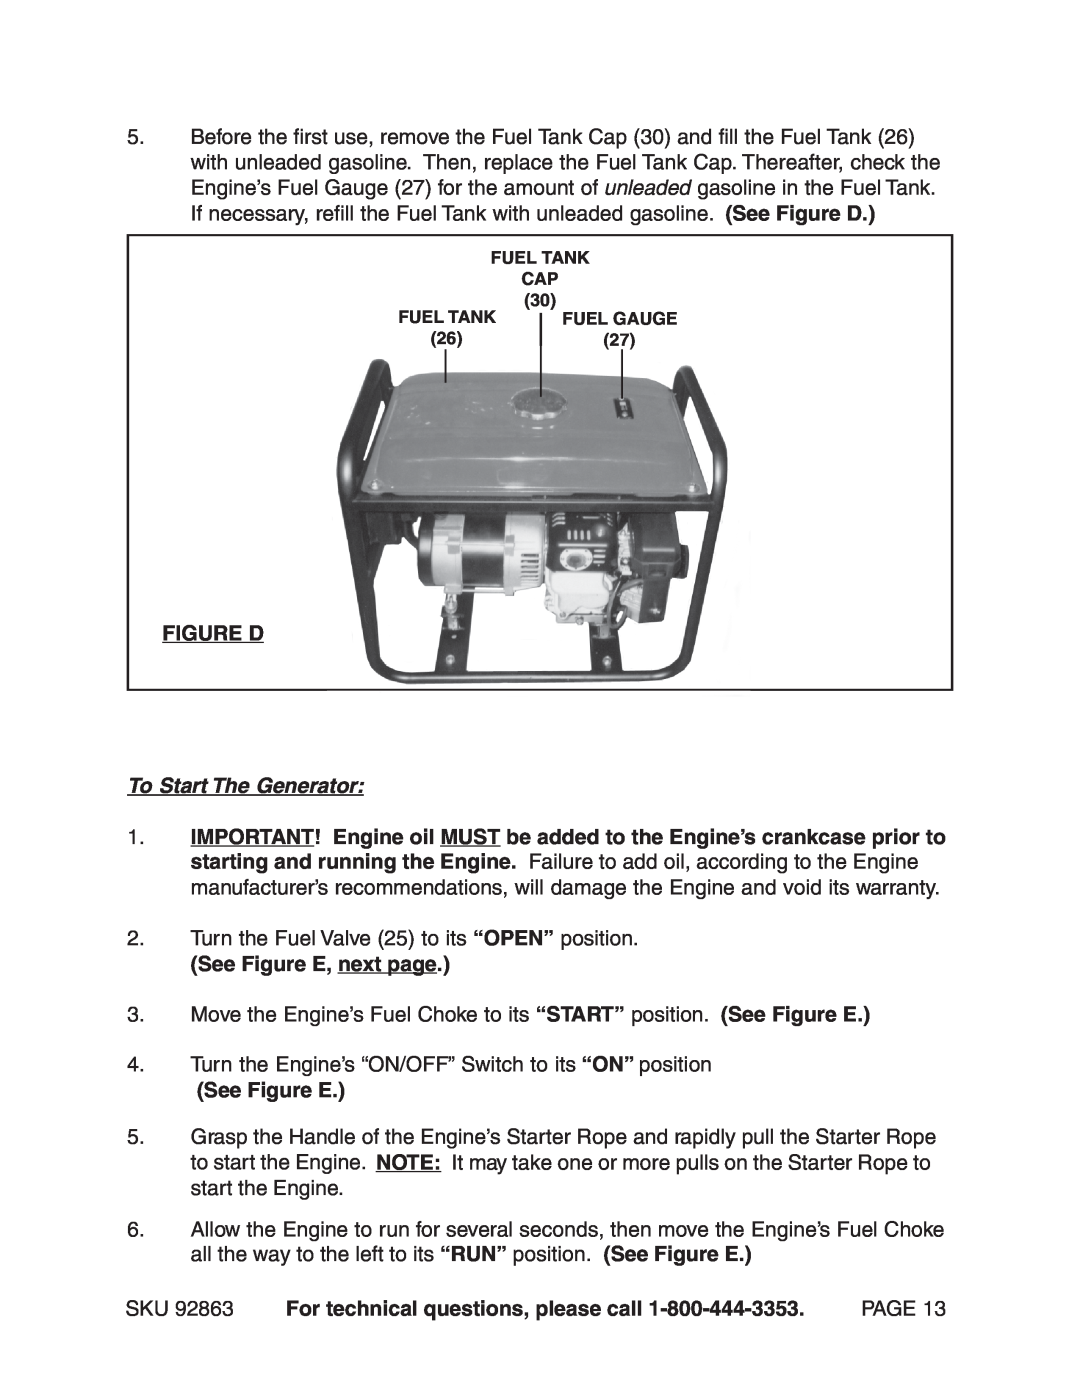 Harbor Freight Tools 92863 Figure D, To Start The Generator, See Figure E, next page, For technical questions, please call 